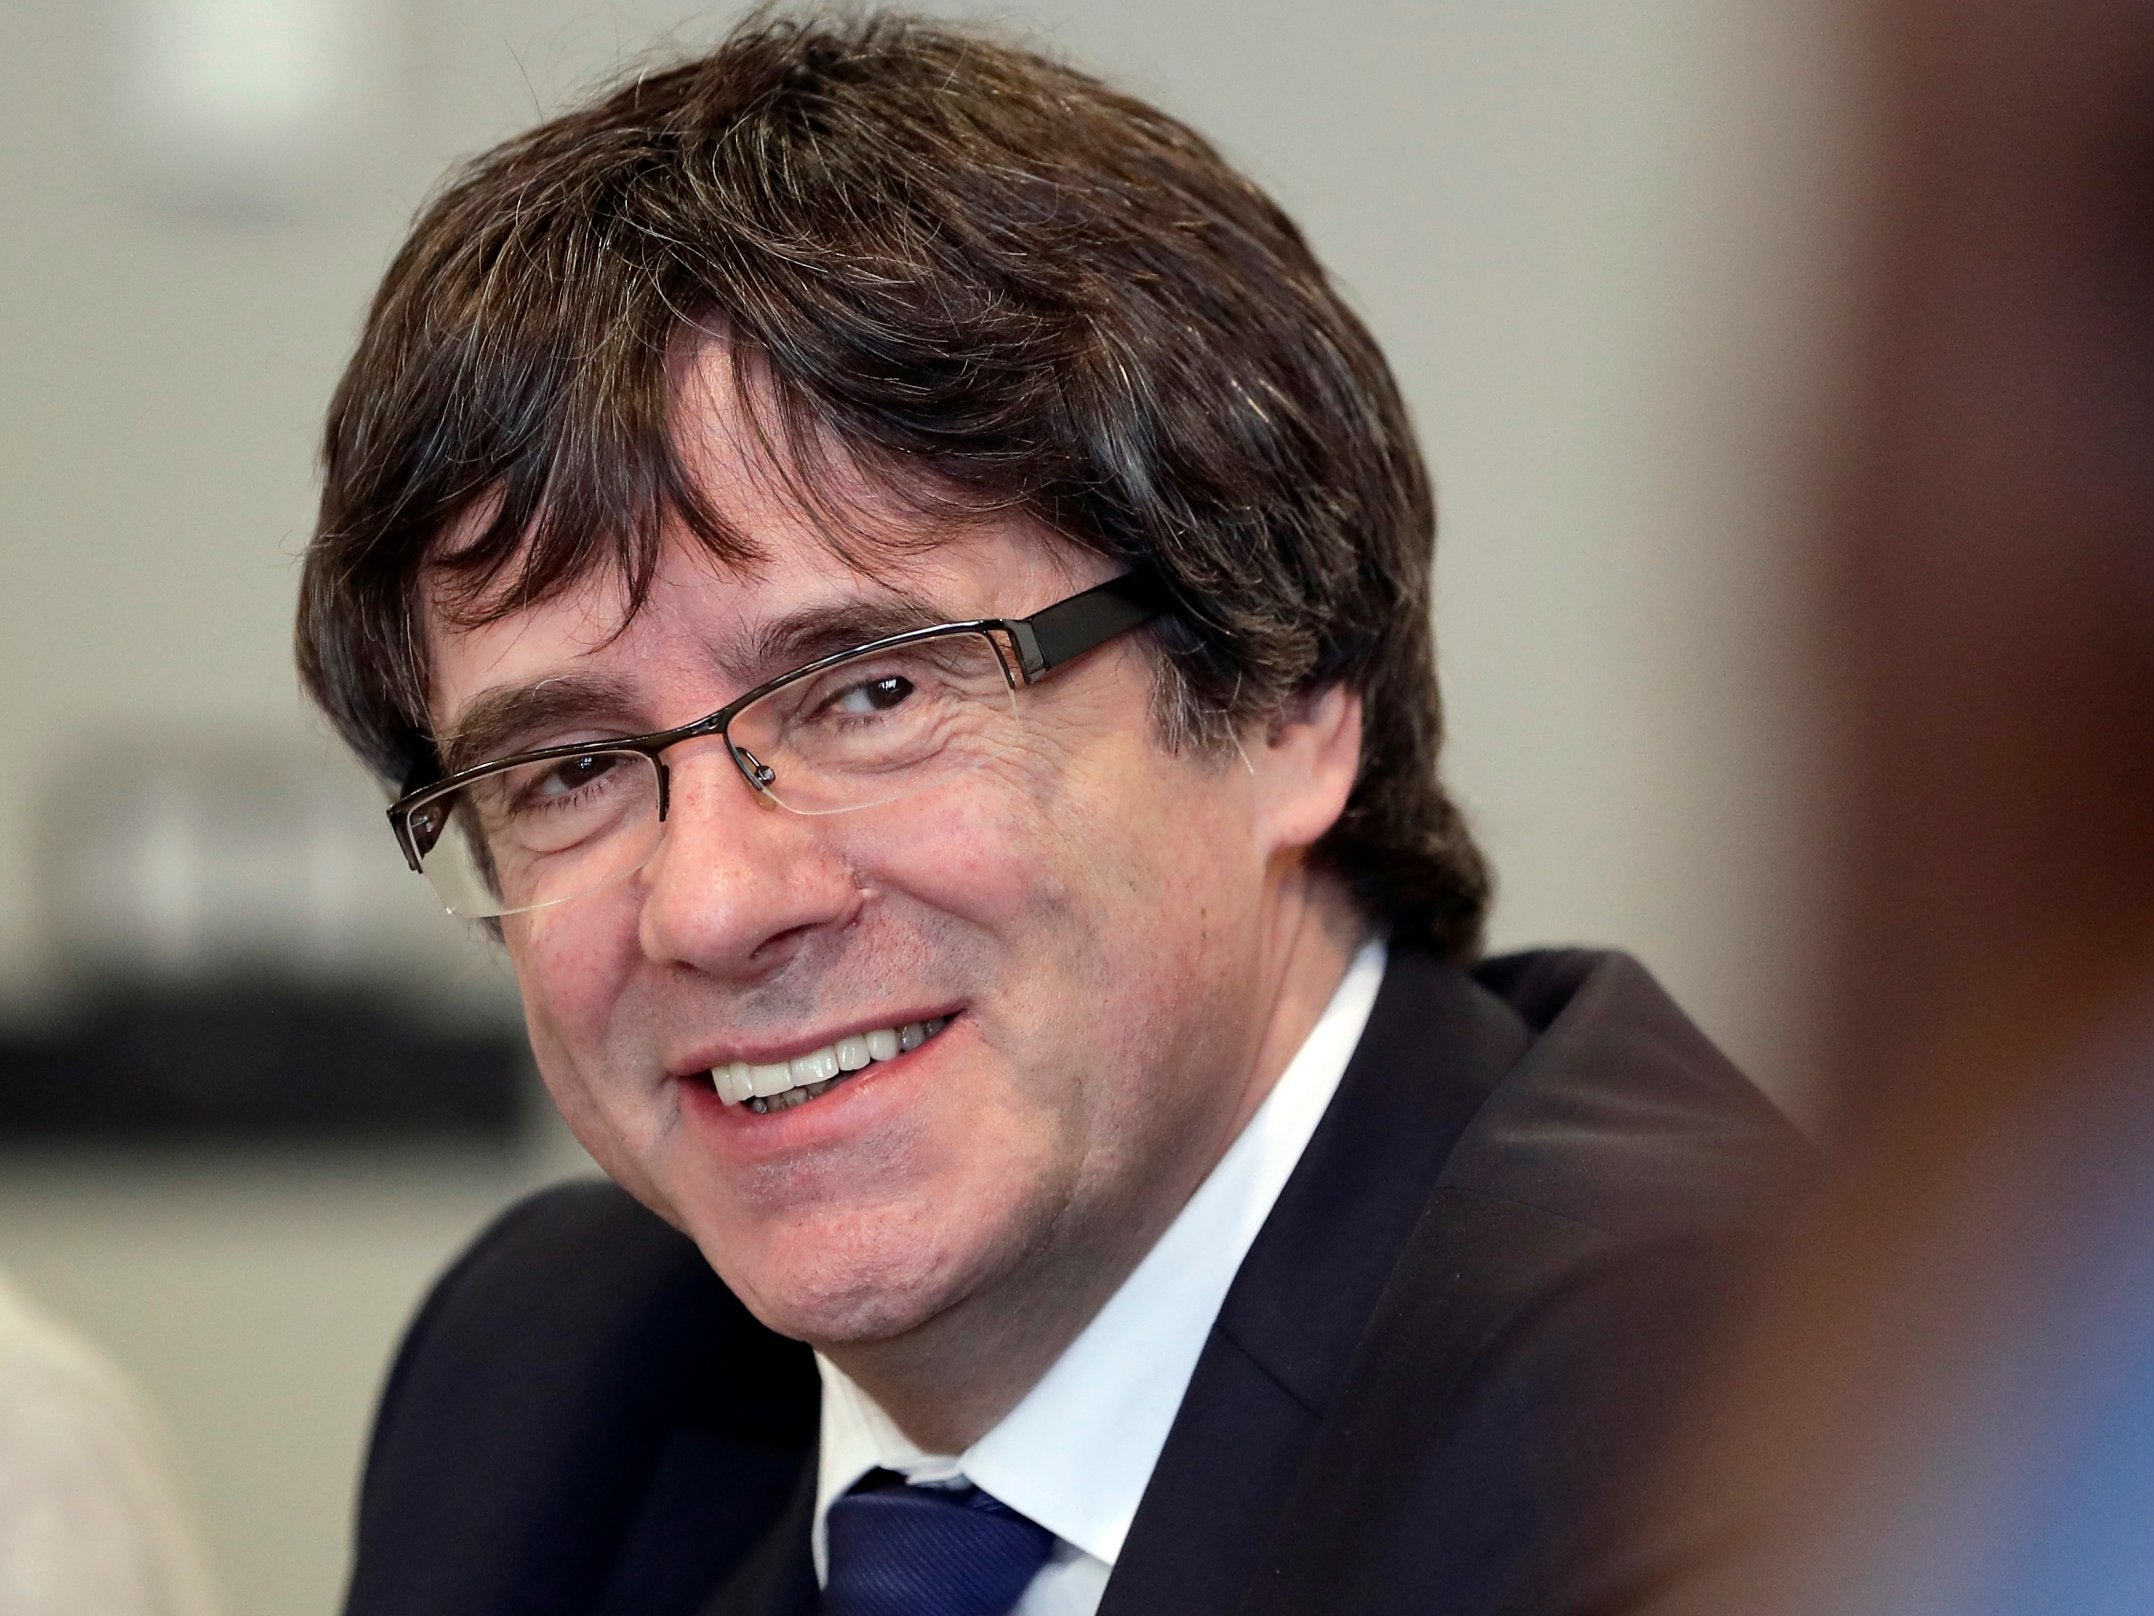 Carles Puigdemont, the former president of Catalonia